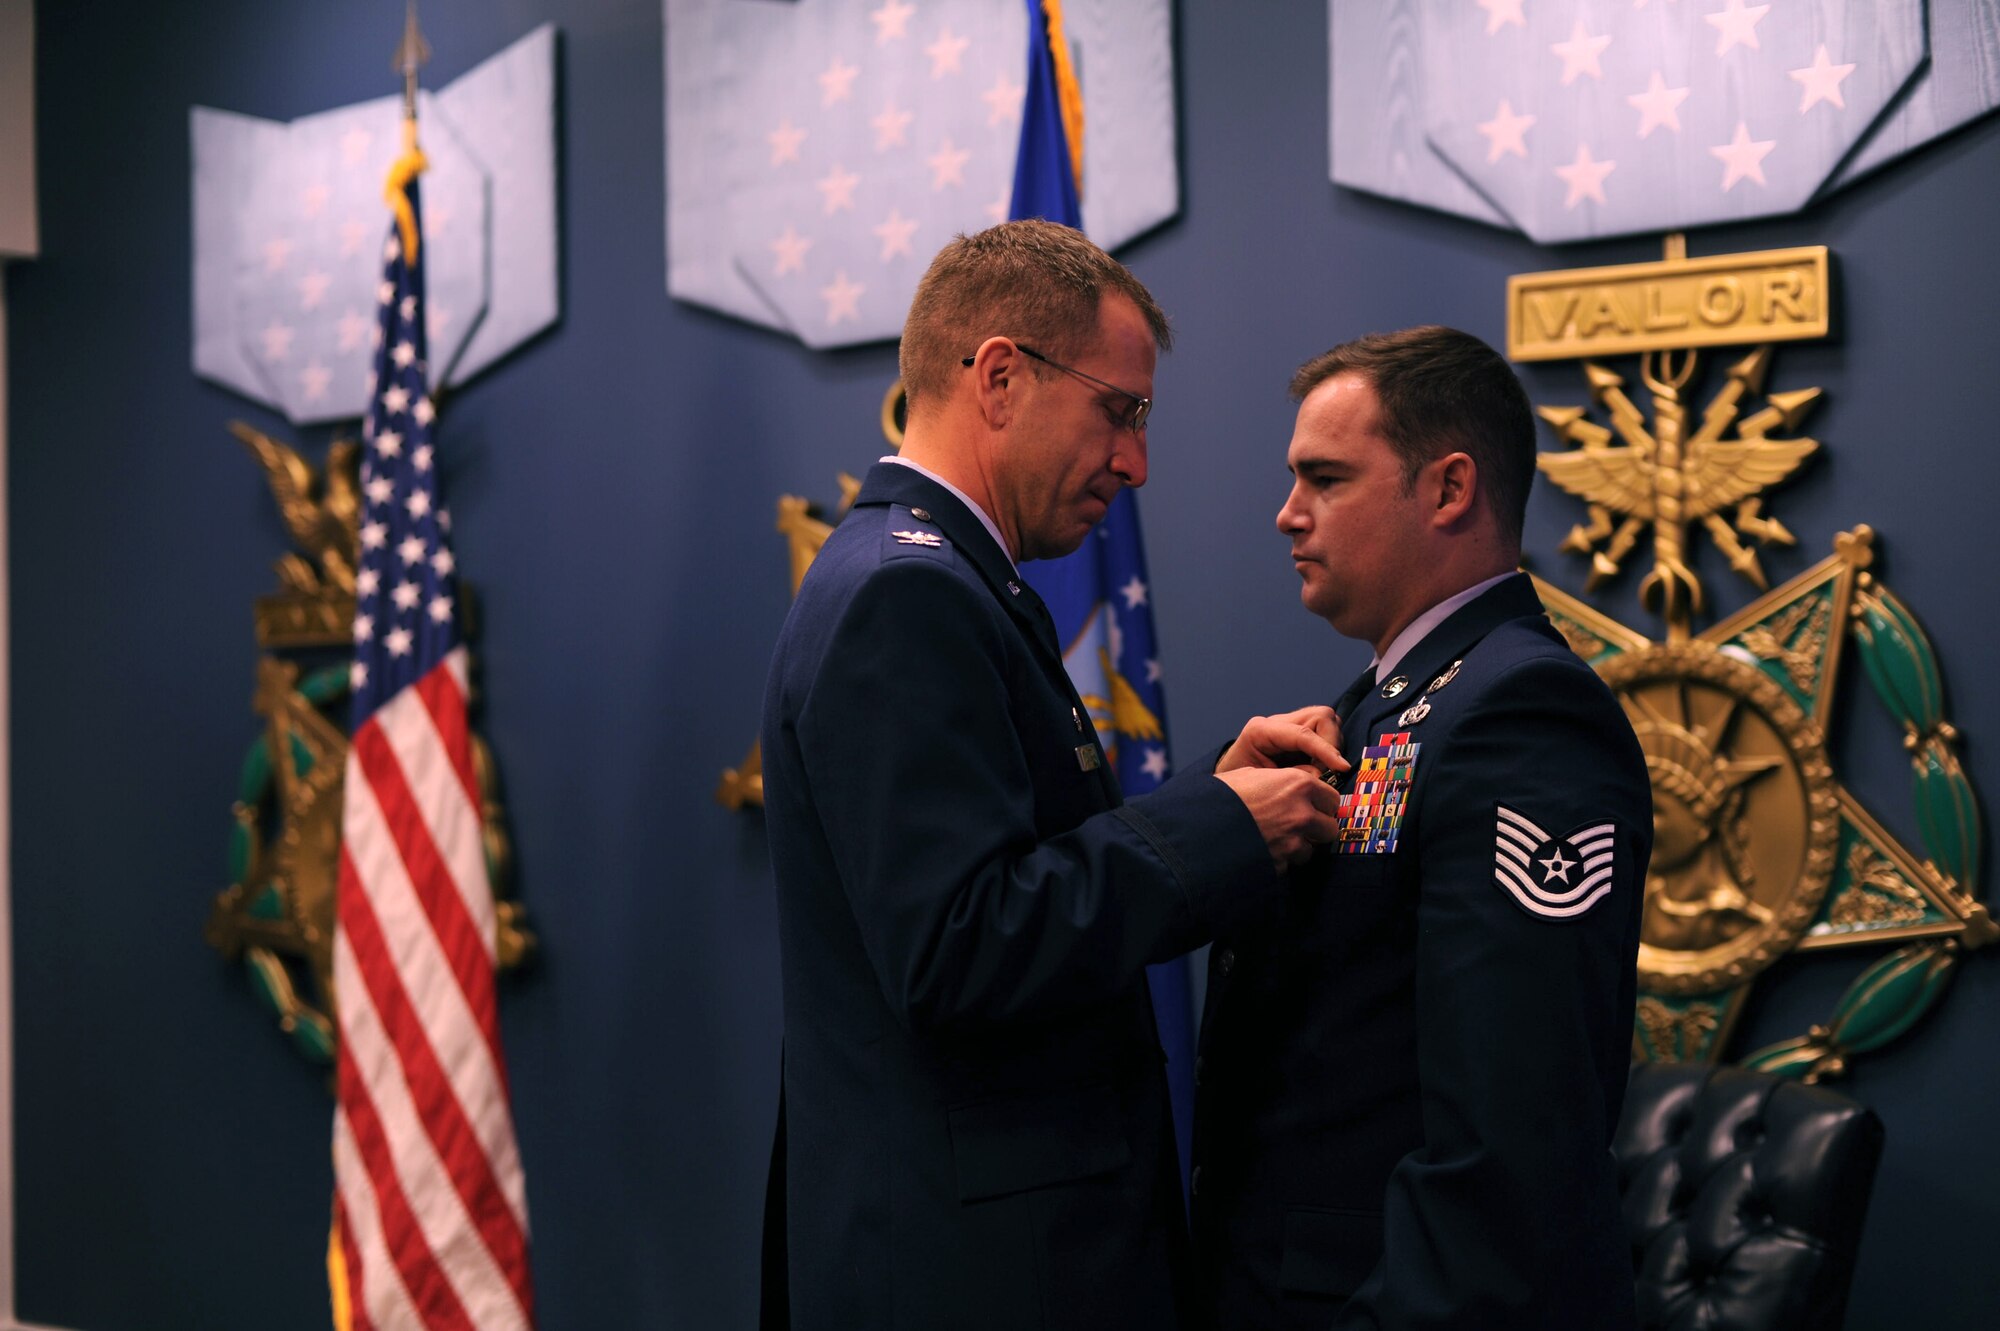 Col. Jim Slife, commander 1st Special Operations Wing, pins a Silver Star on Tech. Sgt. Joseph Deslauriers, an explosive ordnance disposal technician from the 1st Special Operations Civil Engineer Squadron, during a ceremony at the Pentagon, Nov. 14, 2012. Deslauriers earned the medal for gallantry in action while serving in Afghanistan Sep. 23, 2012. (U.S. Air Force Photo/Airman 1st Class Hayden K. Hyatt)